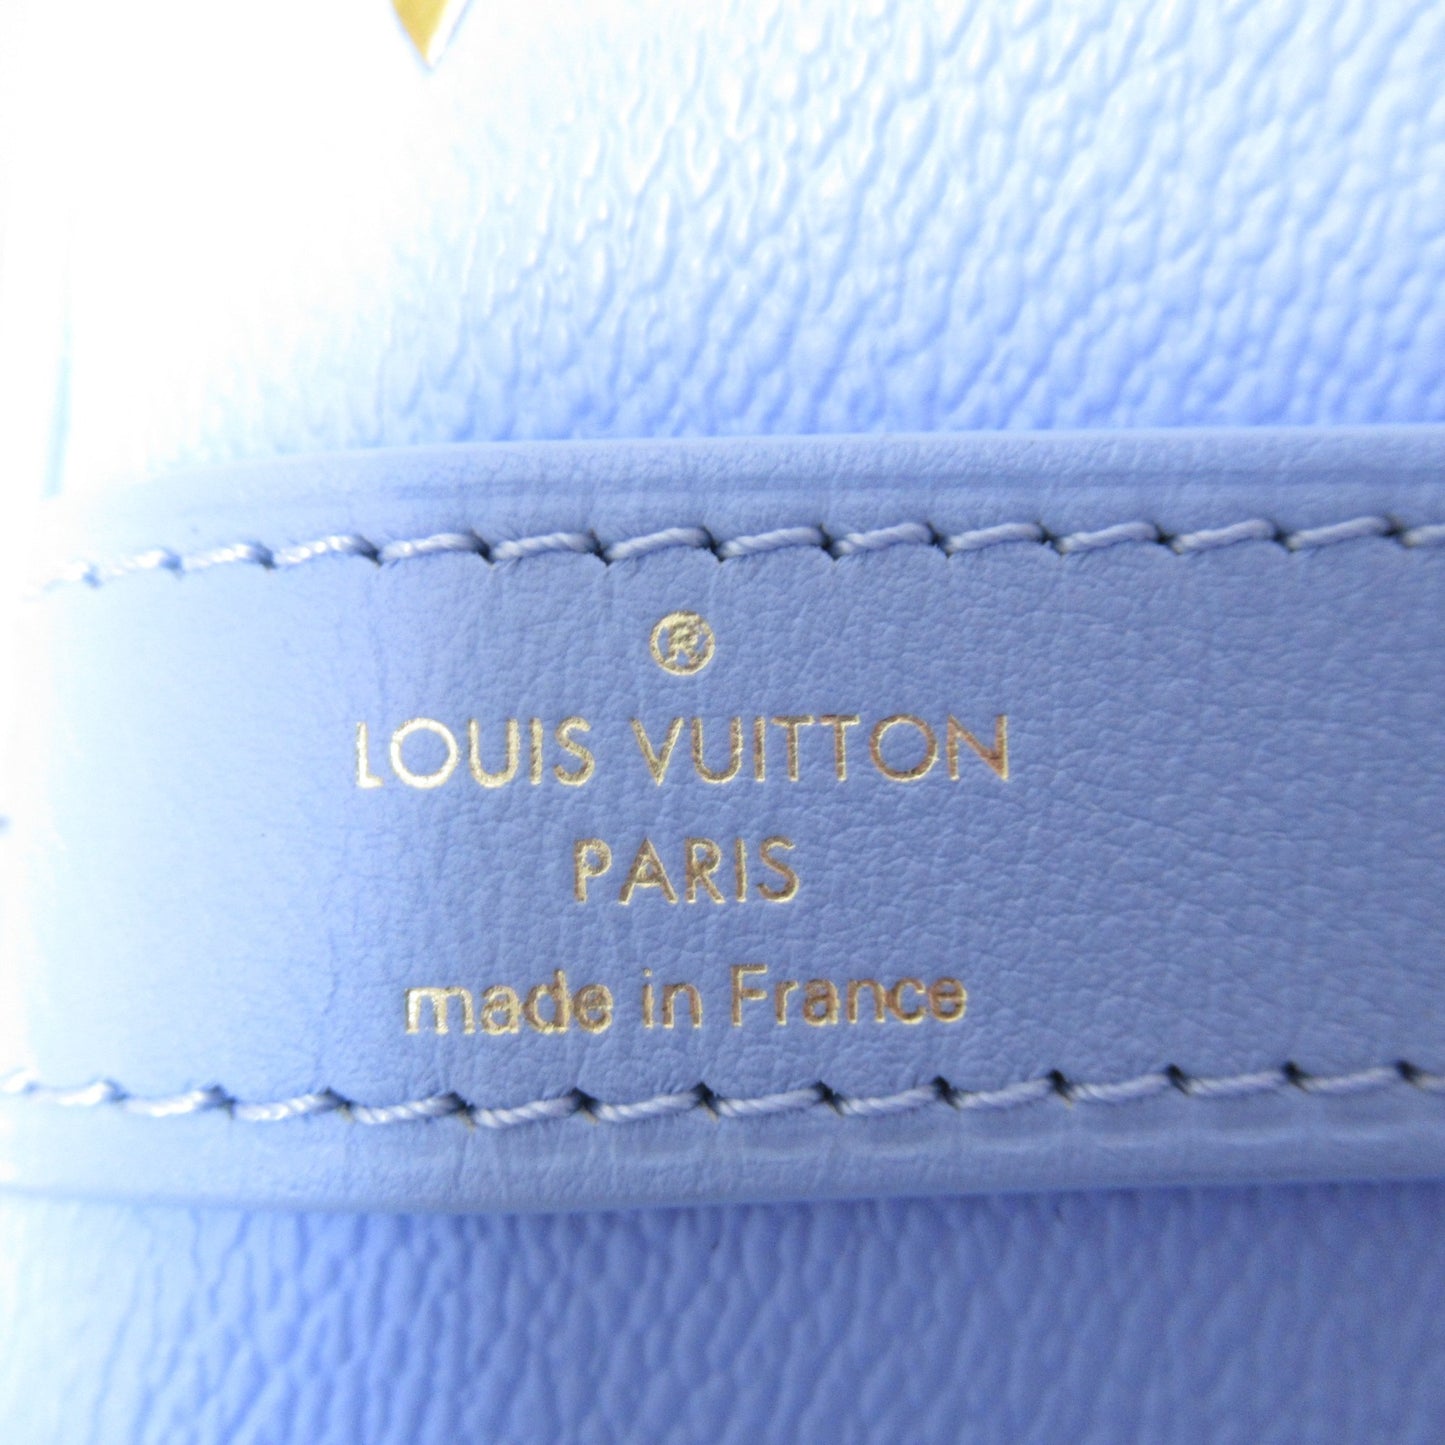 Louis Vuitton Unisex Premium Blue Canvas Boston Bag for Travel or Everyday Use - Excellent Condition in Blue